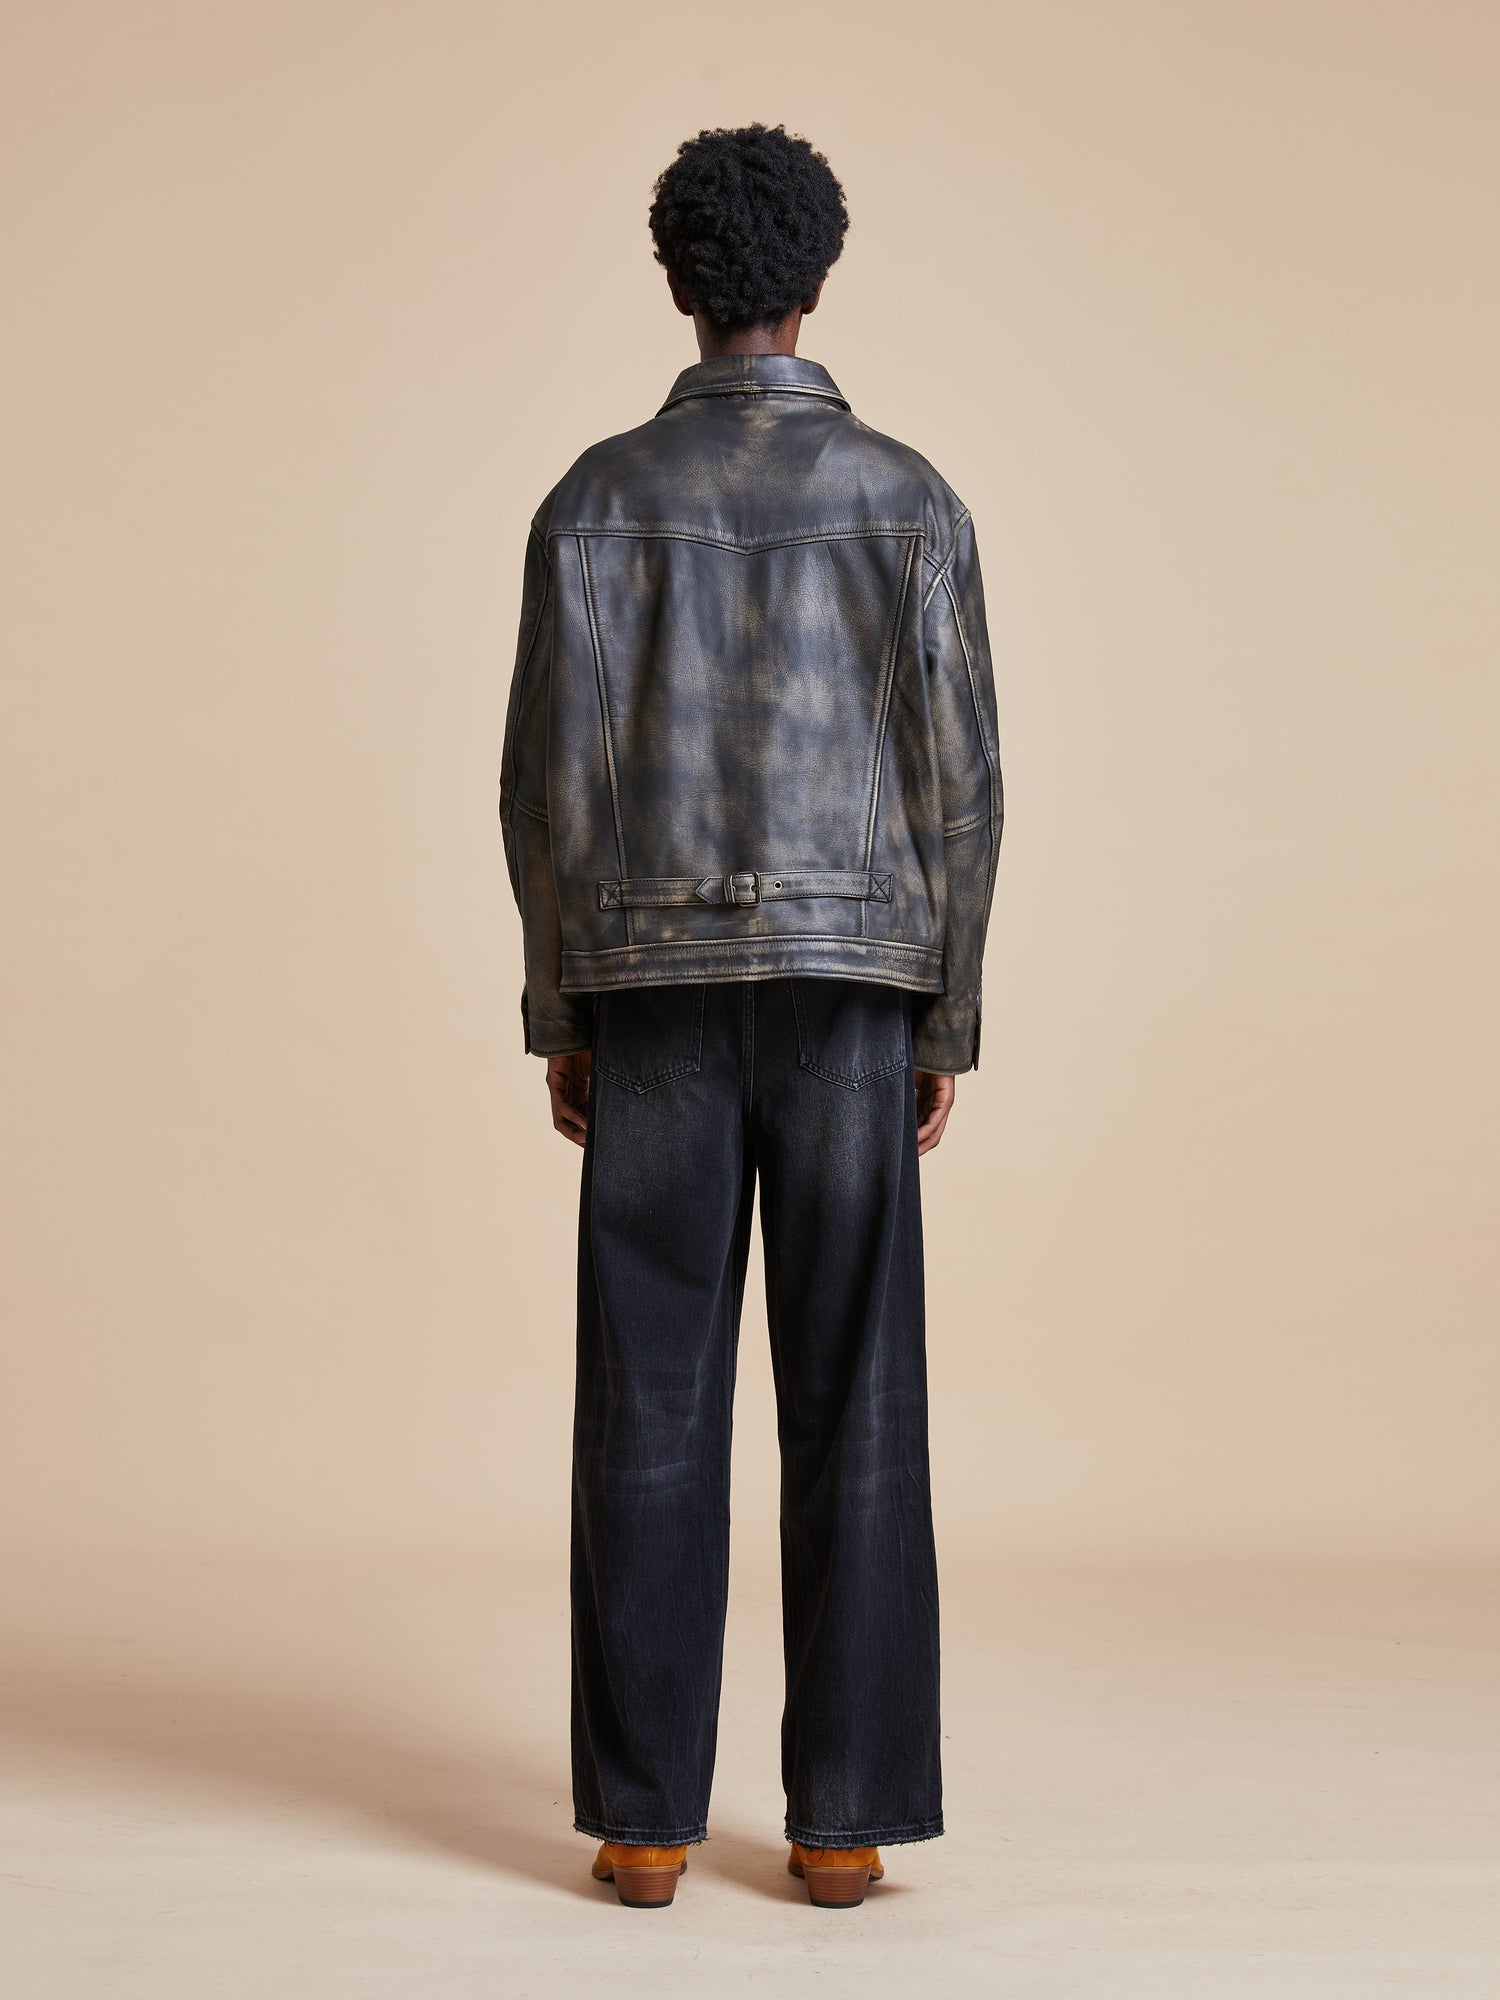 The back view of a man wearing a Found Distressed Leather Pocket Jacket and black pants.